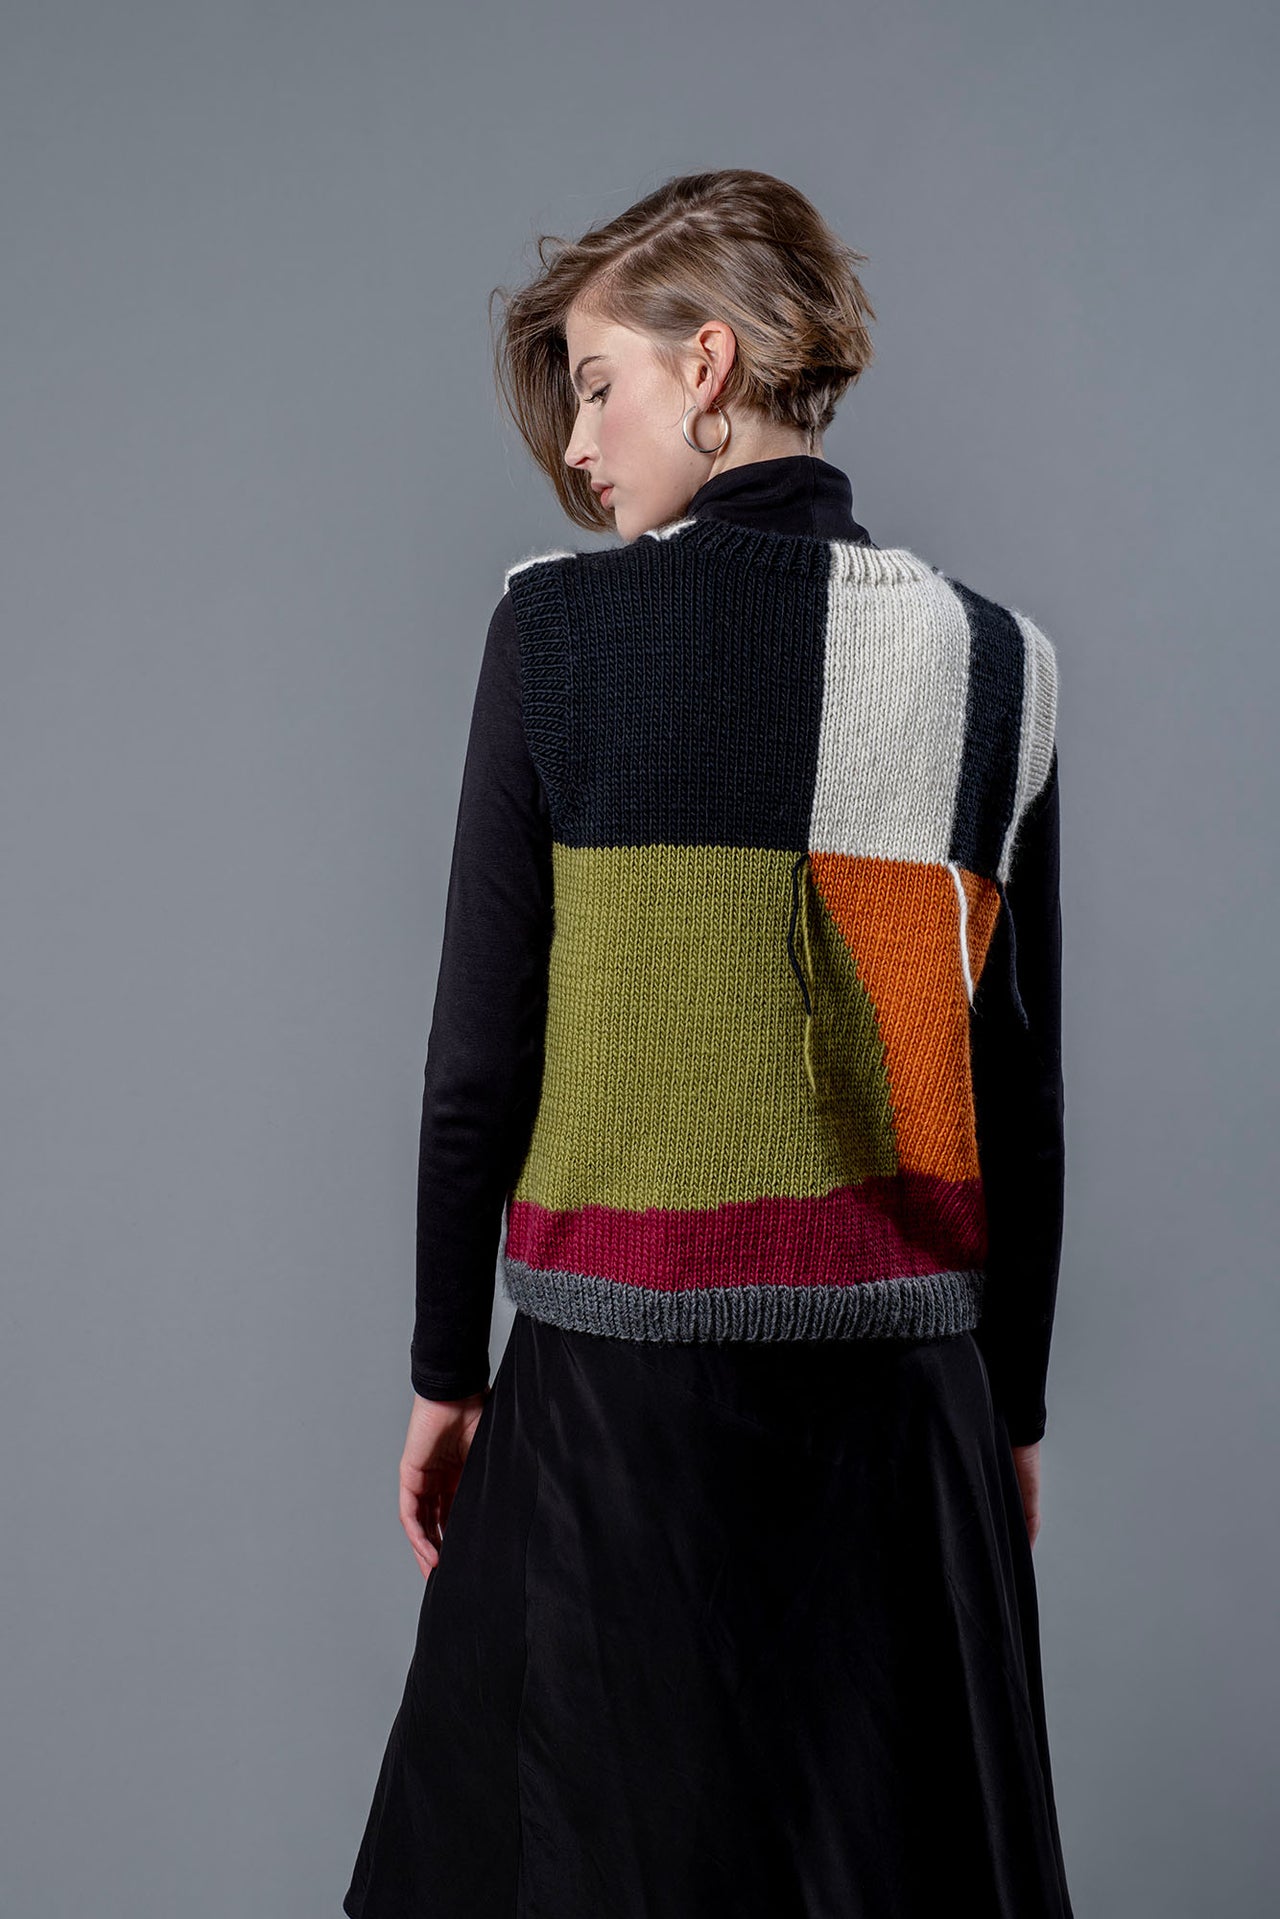 Women wearing wool vest from behind. Wool vest with green, orange, black, white and red colour block design and hanging threads.